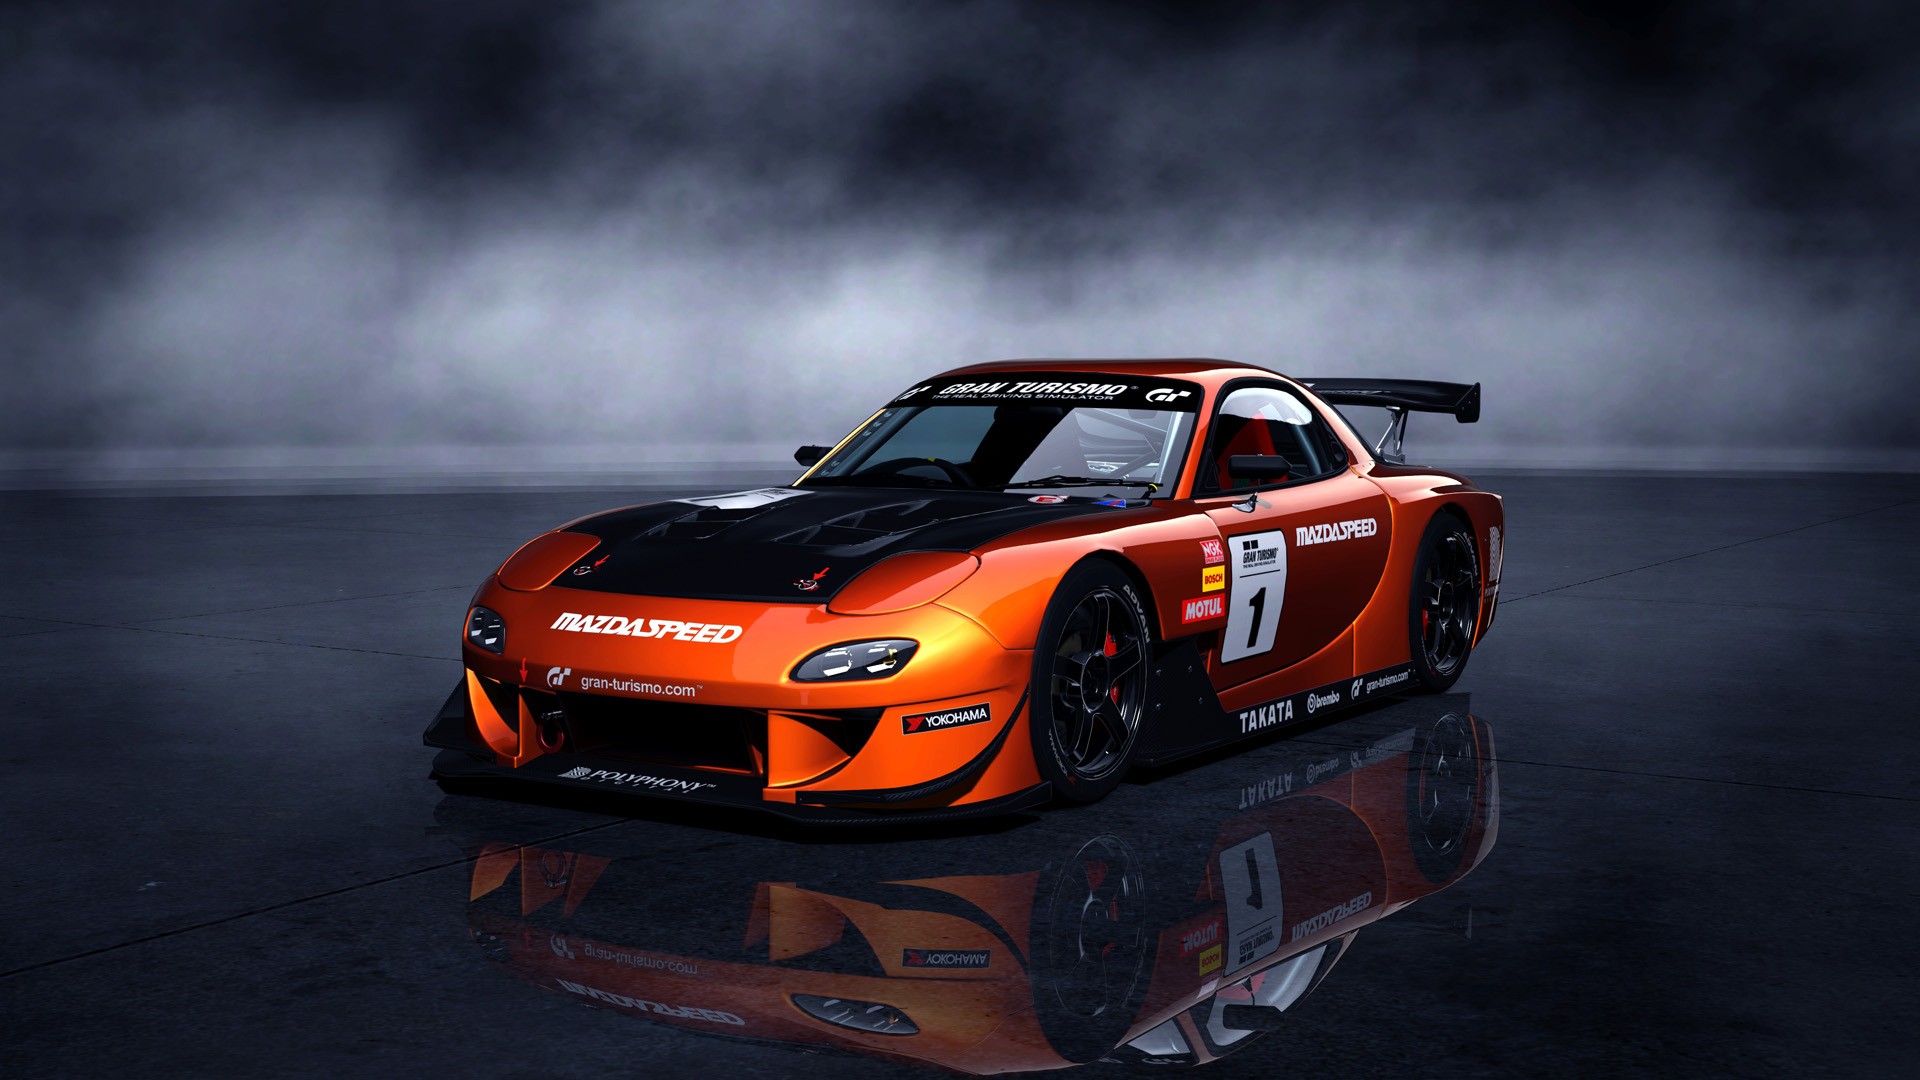 Related Post "mazda rx7 wallpaper"